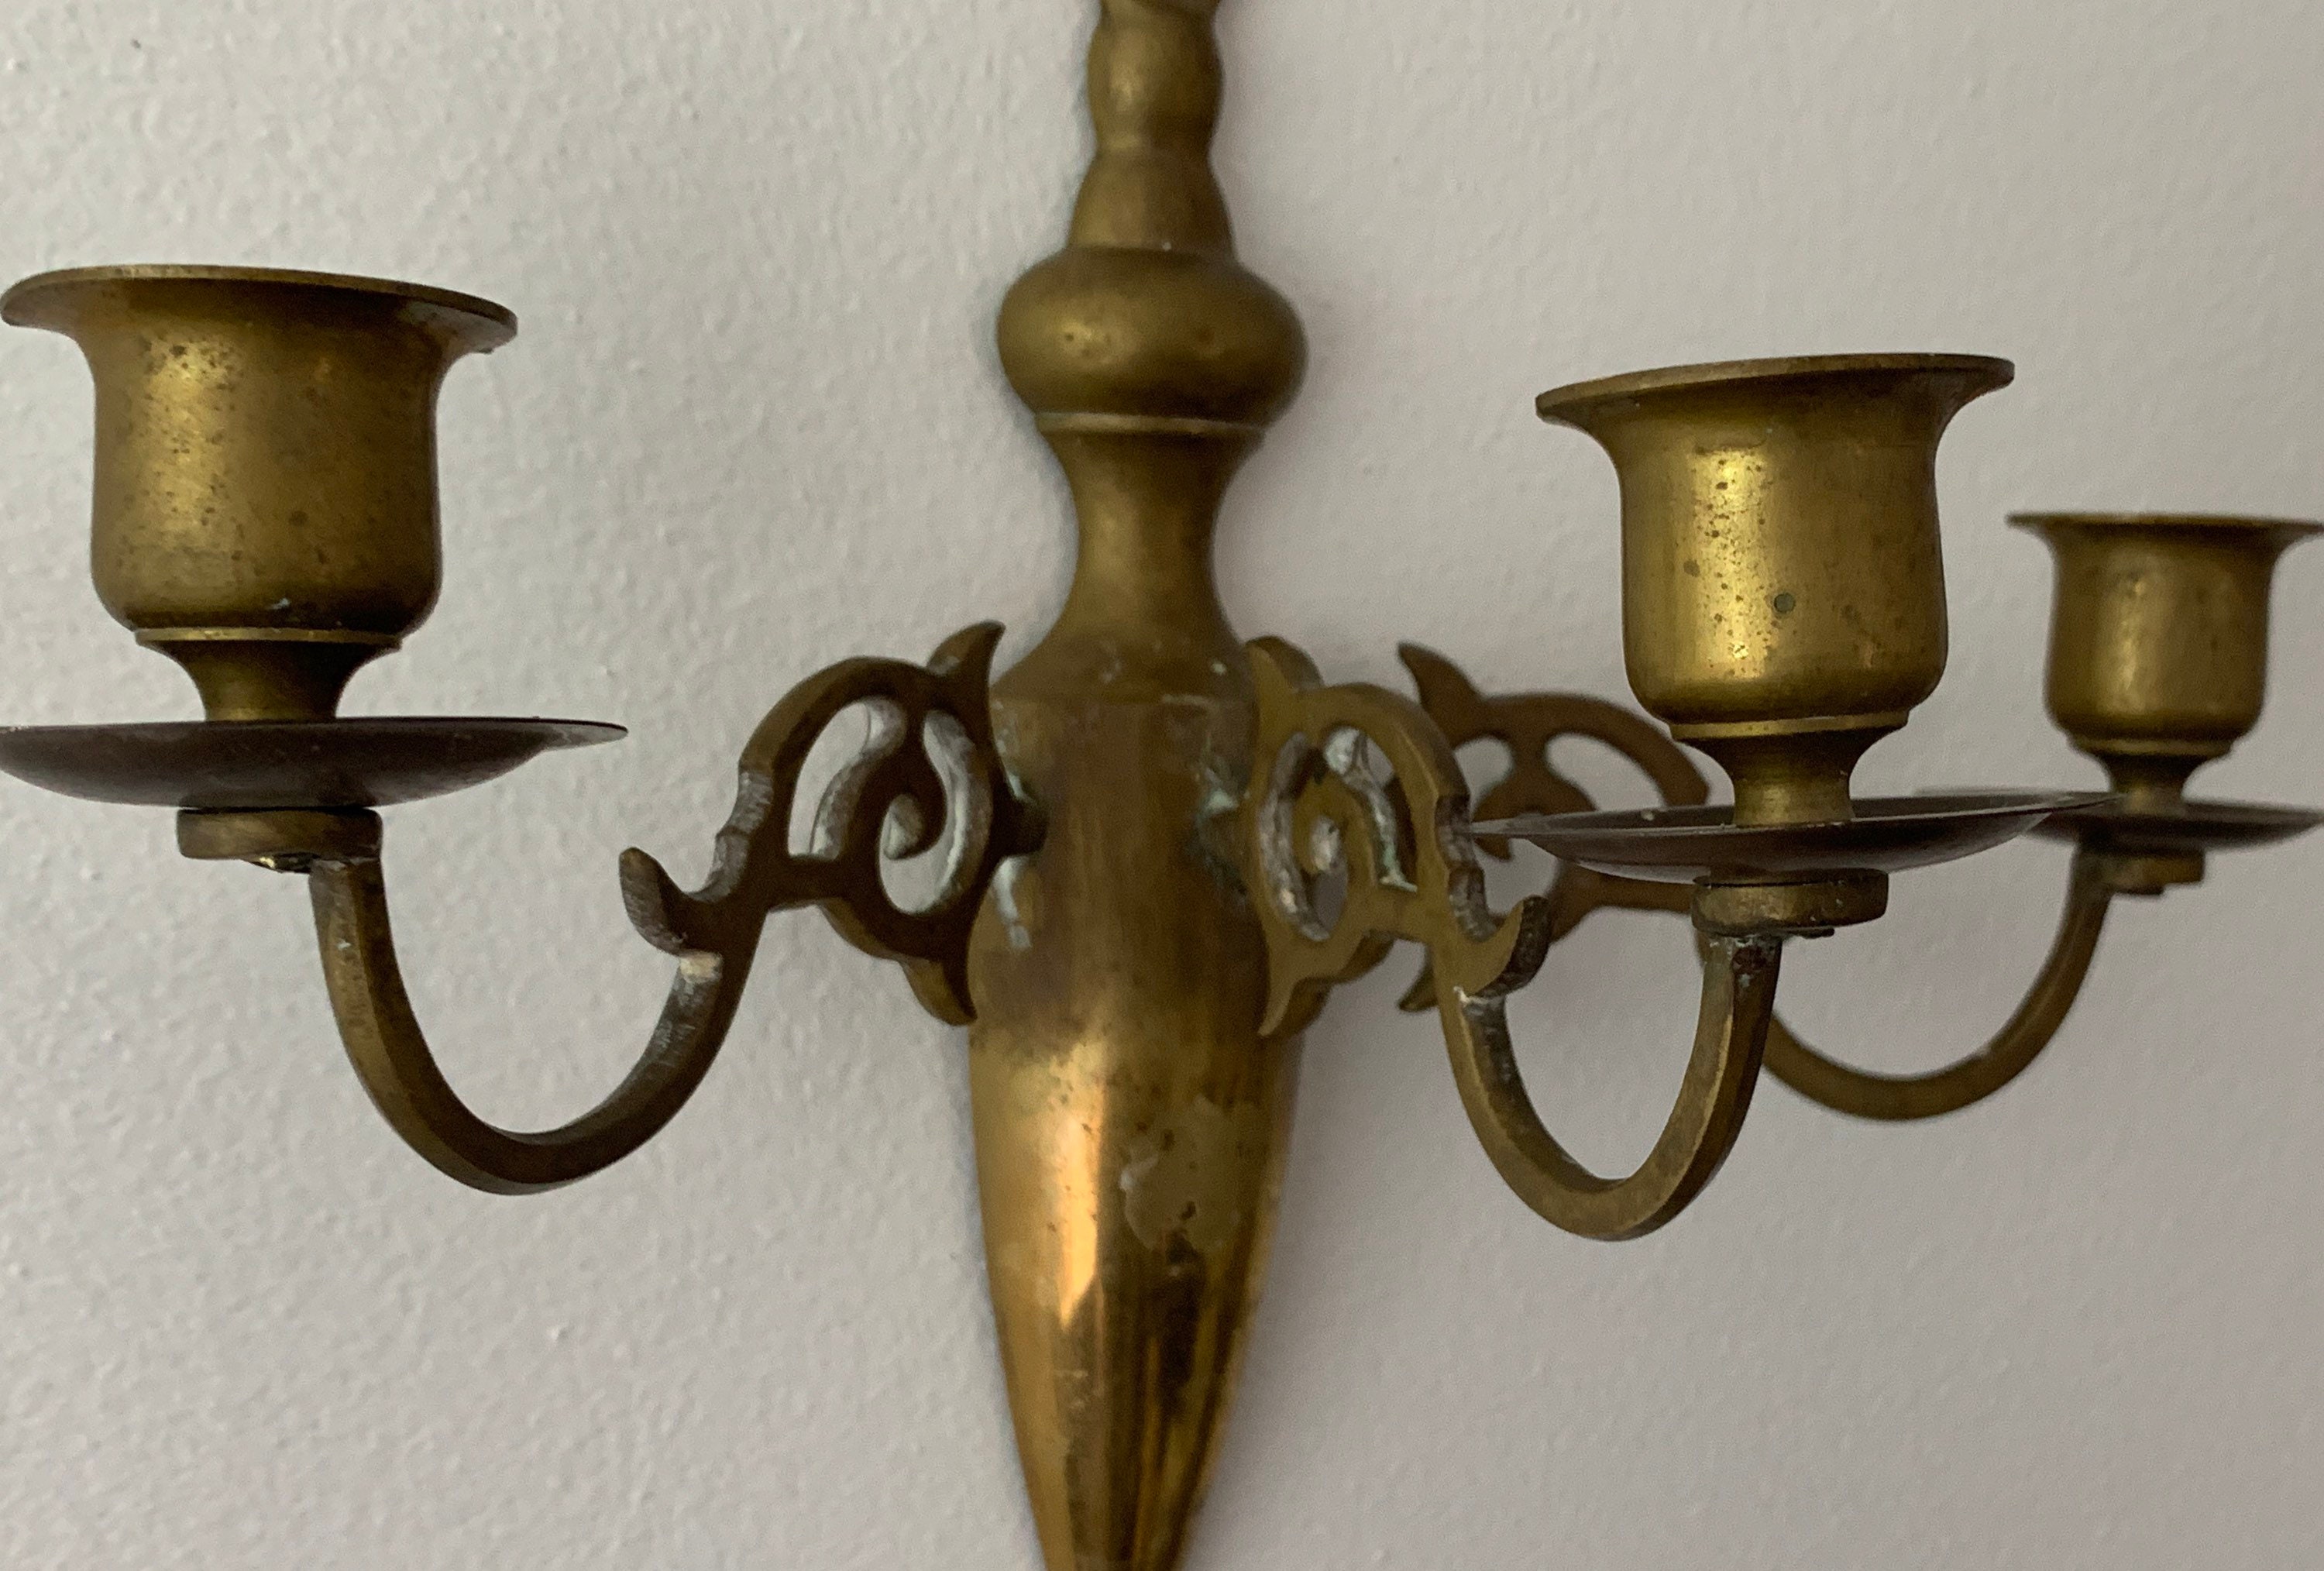 Vintage Single Brass Sconce Candleholders Holds 3 Candles - Retro Wall